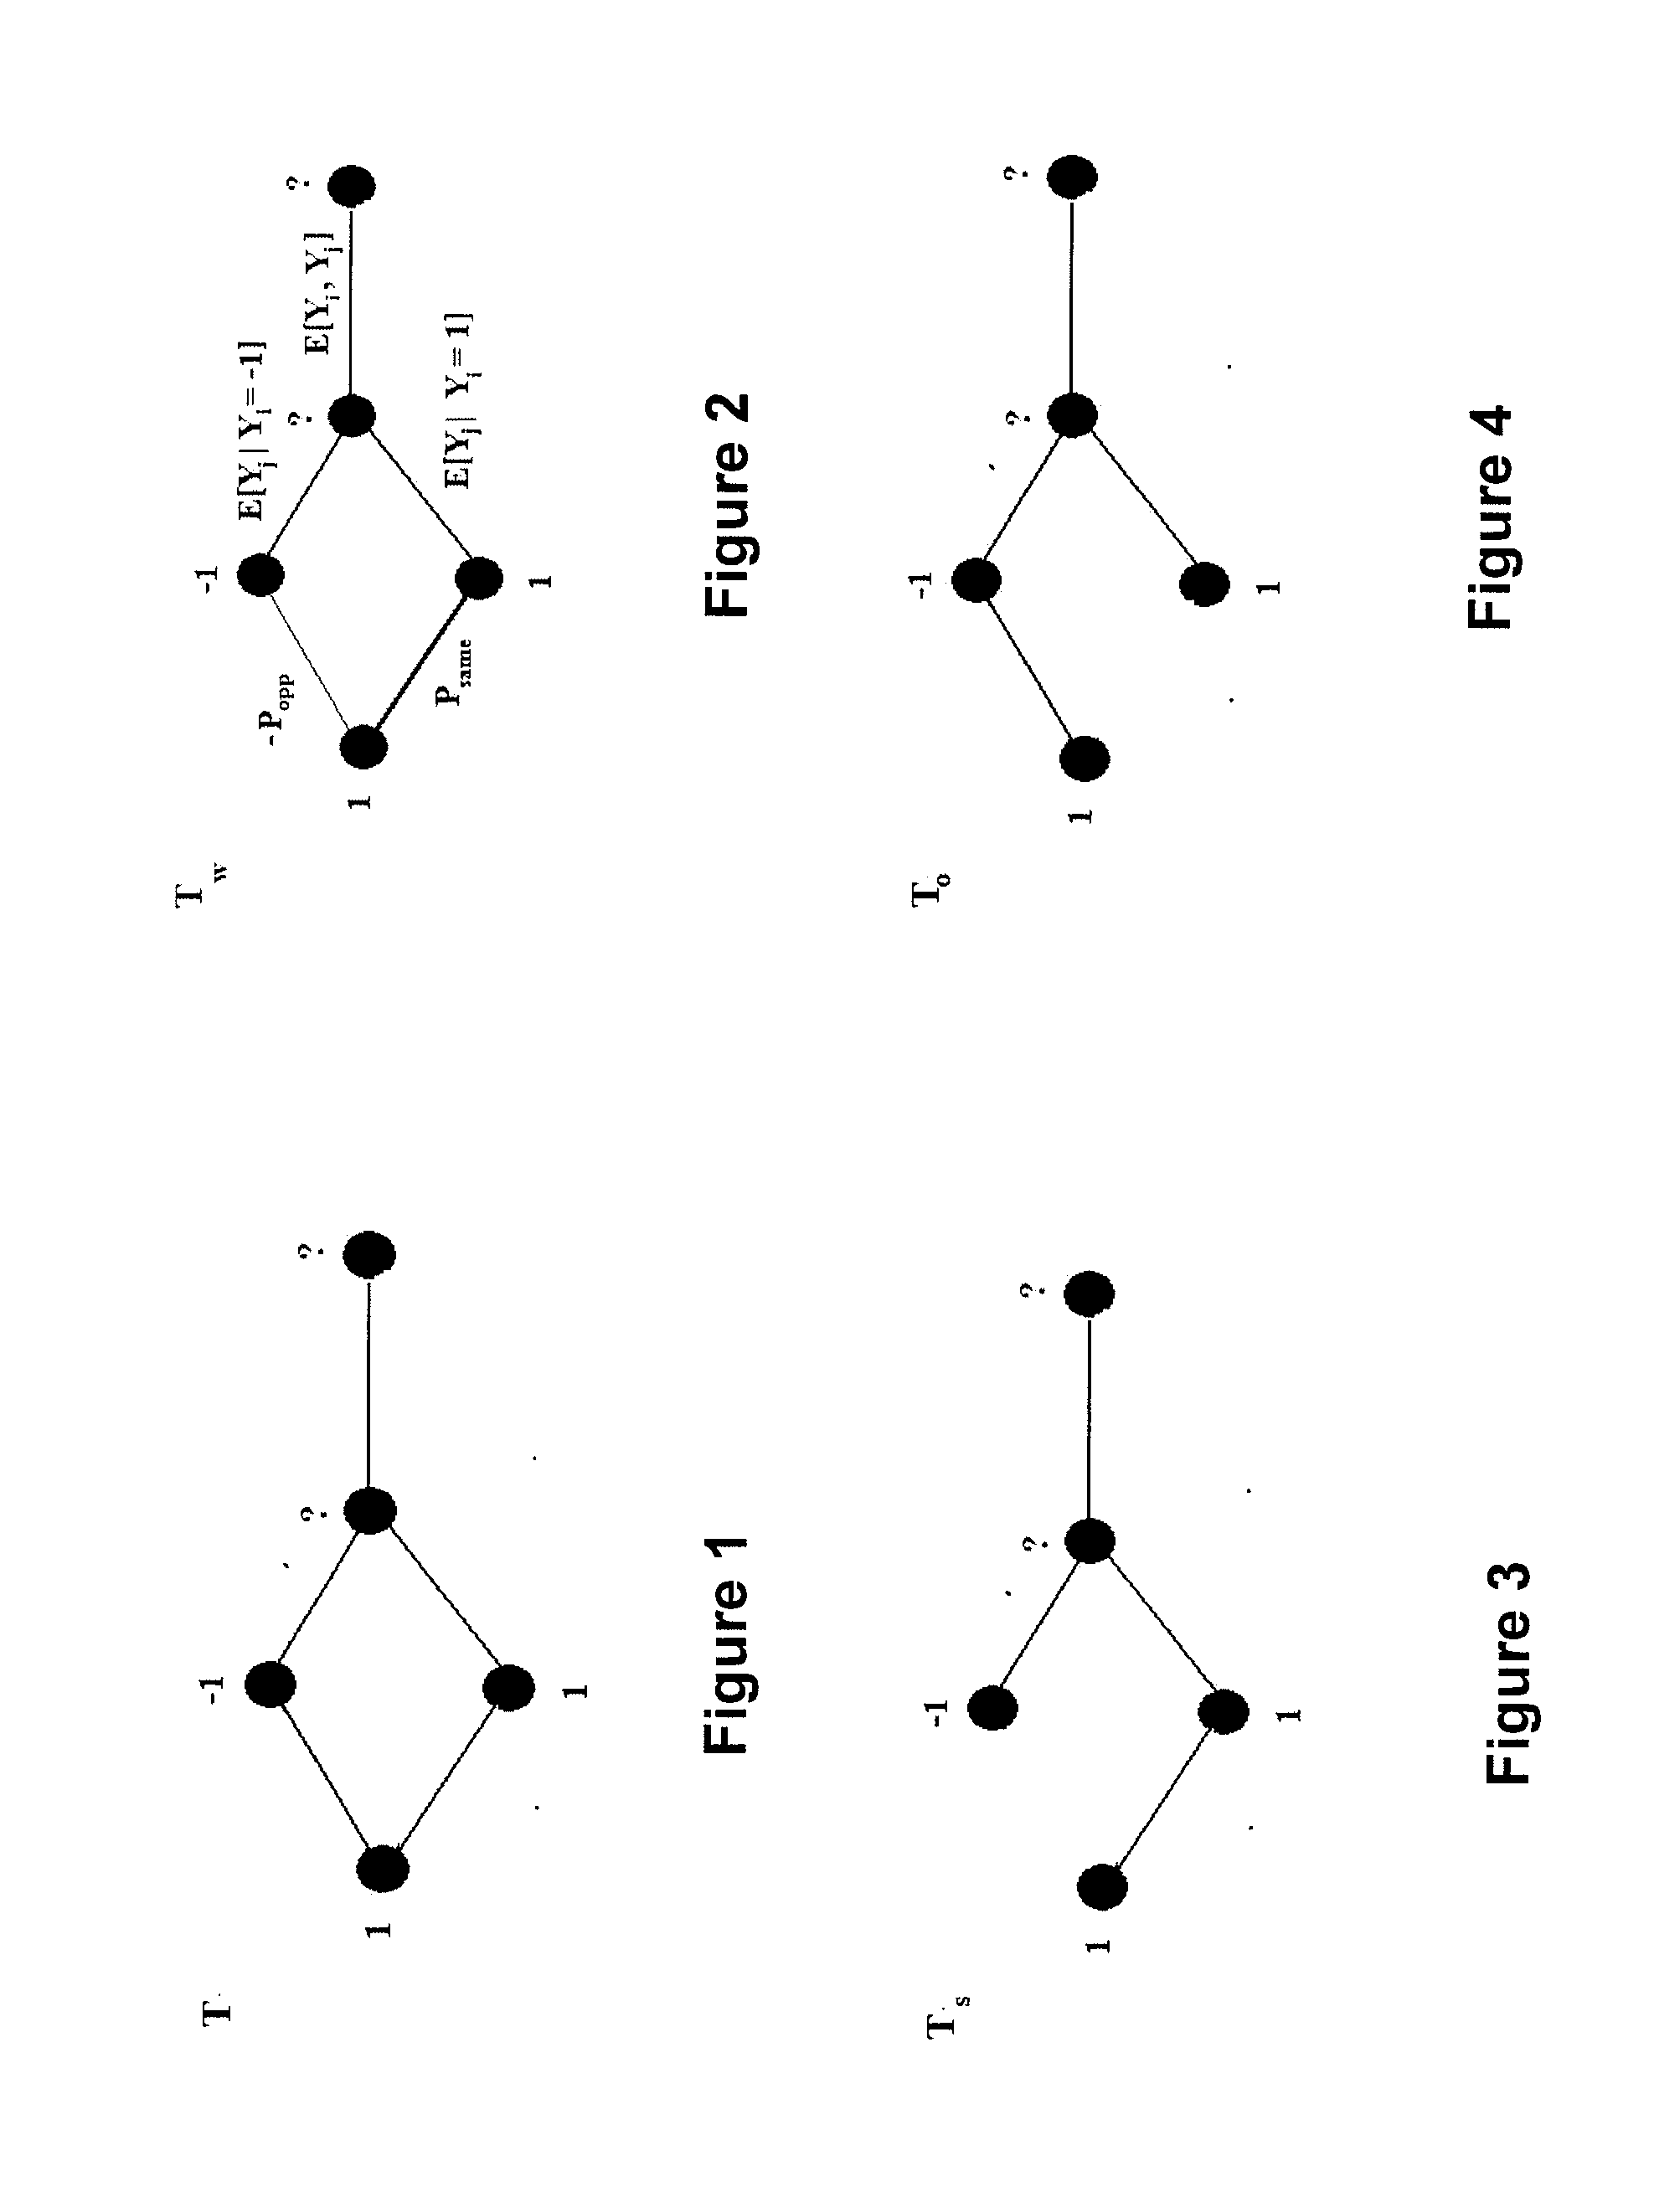 System  and method for using graph transduction techniques to make relational classifications on a single connected network